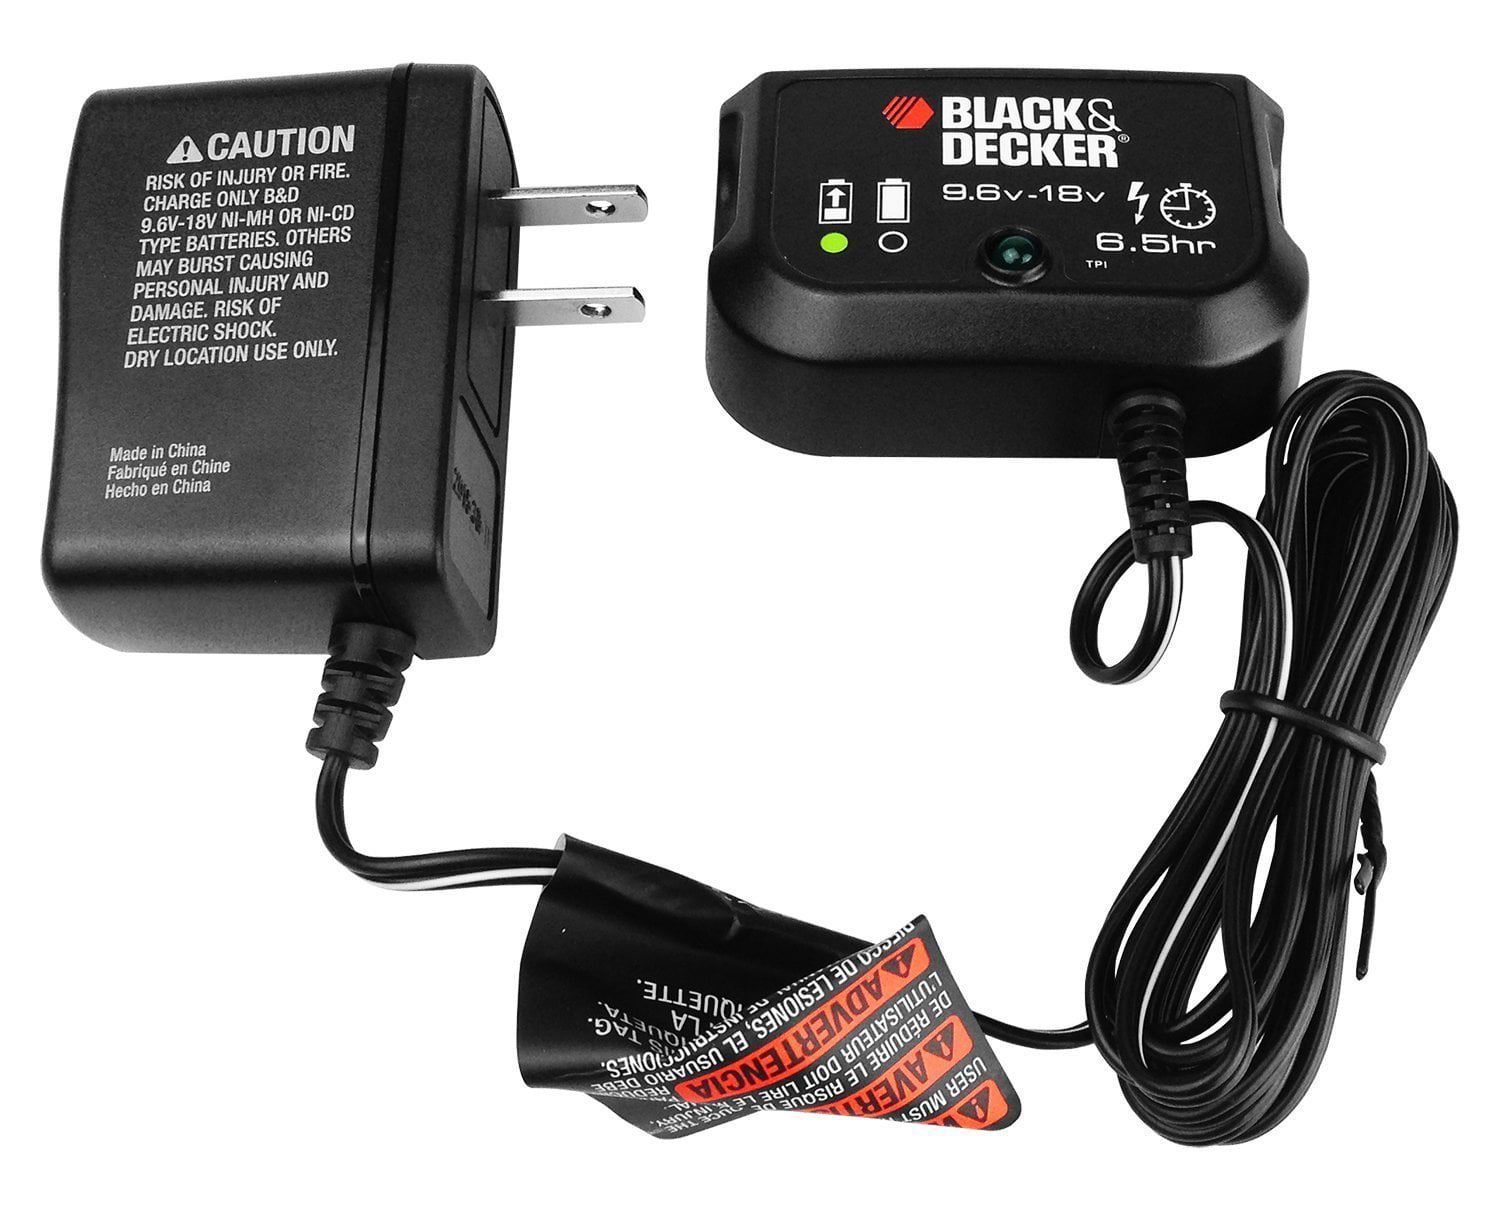 NEW AC Adapter For Black & Decker 90532614 12V B&D 12Volts Drill Battery Charger 